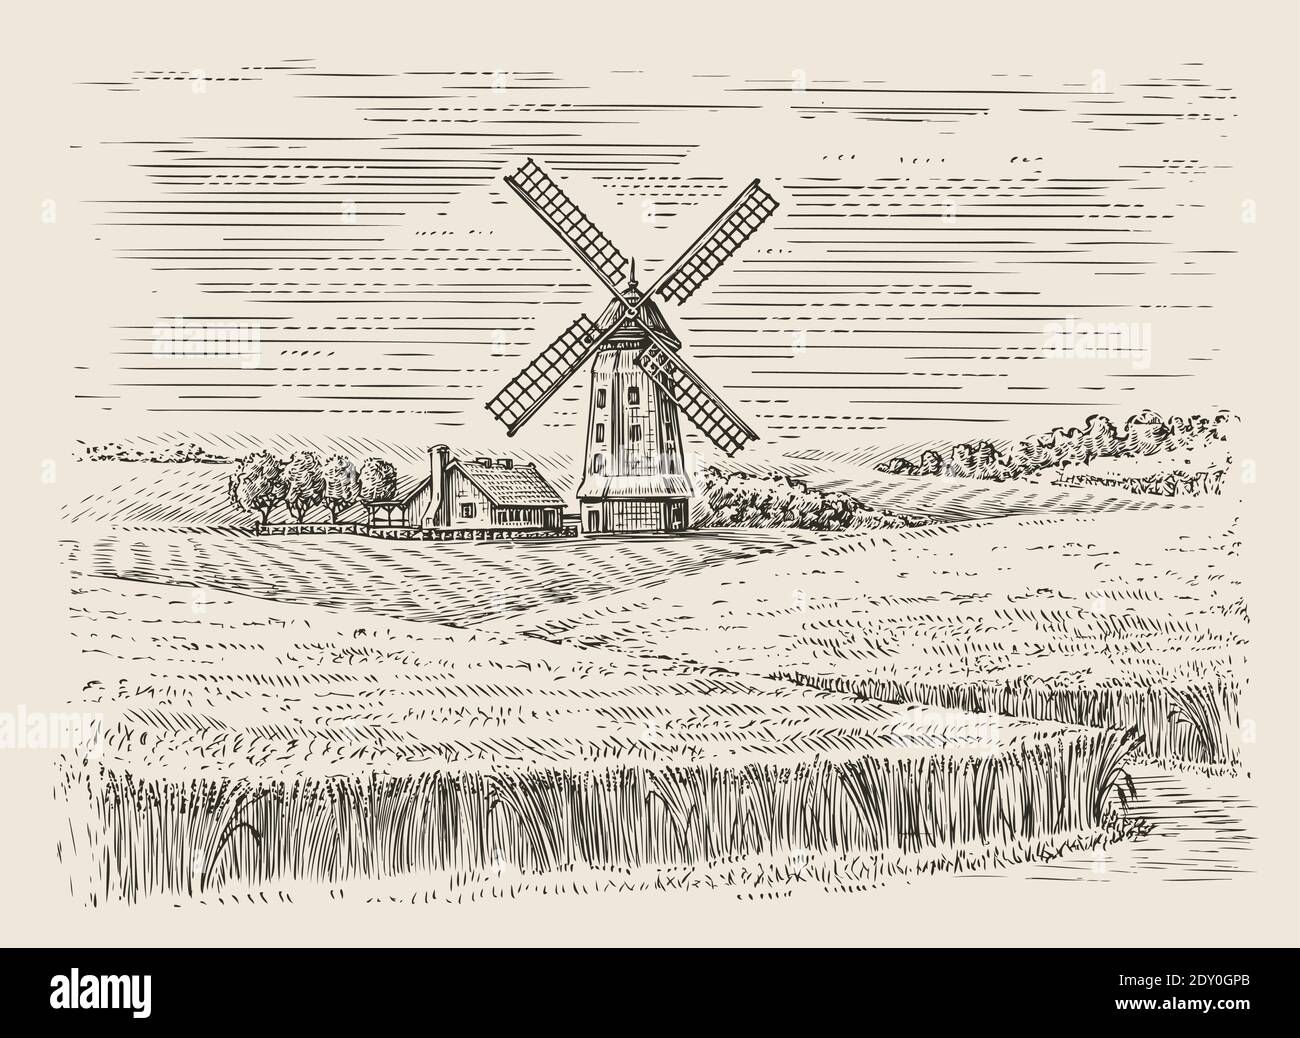 Wheat field and windmill sketch. Farm landscape vintage vector illustration Stock Vector